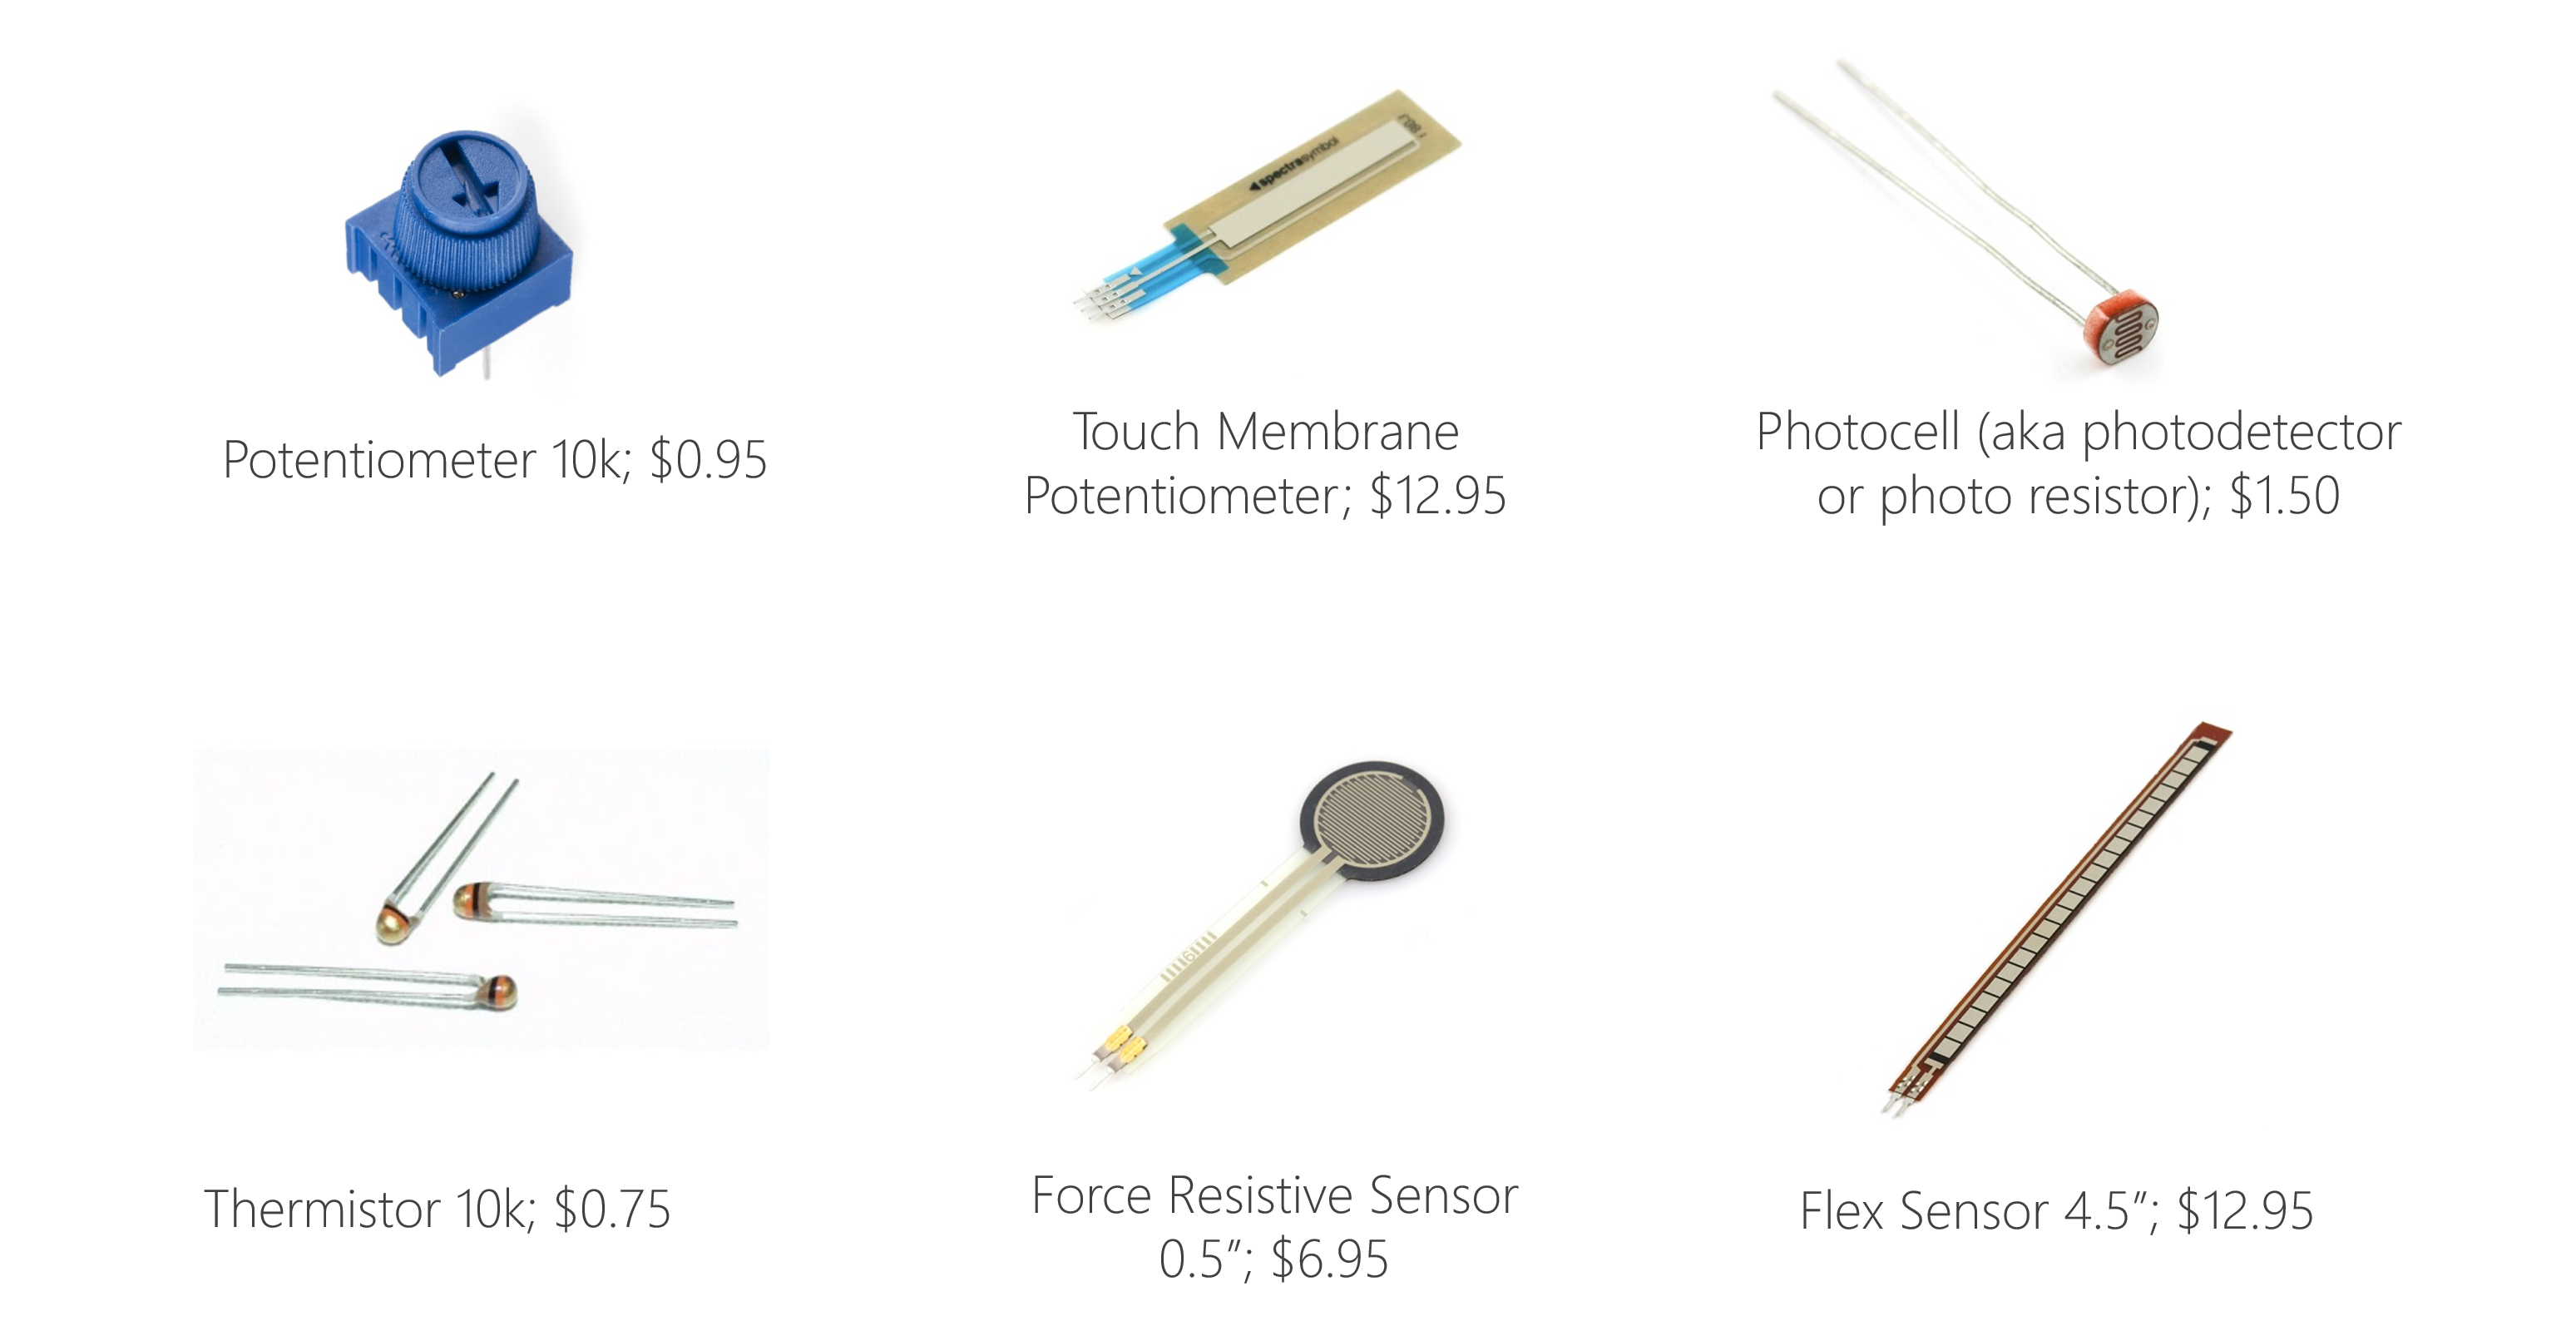 Grid of images showing different types of variable resistors, including: potentiometers, touch membranes, photocells, thermistors, force-sensitive resistors, and flex sensors